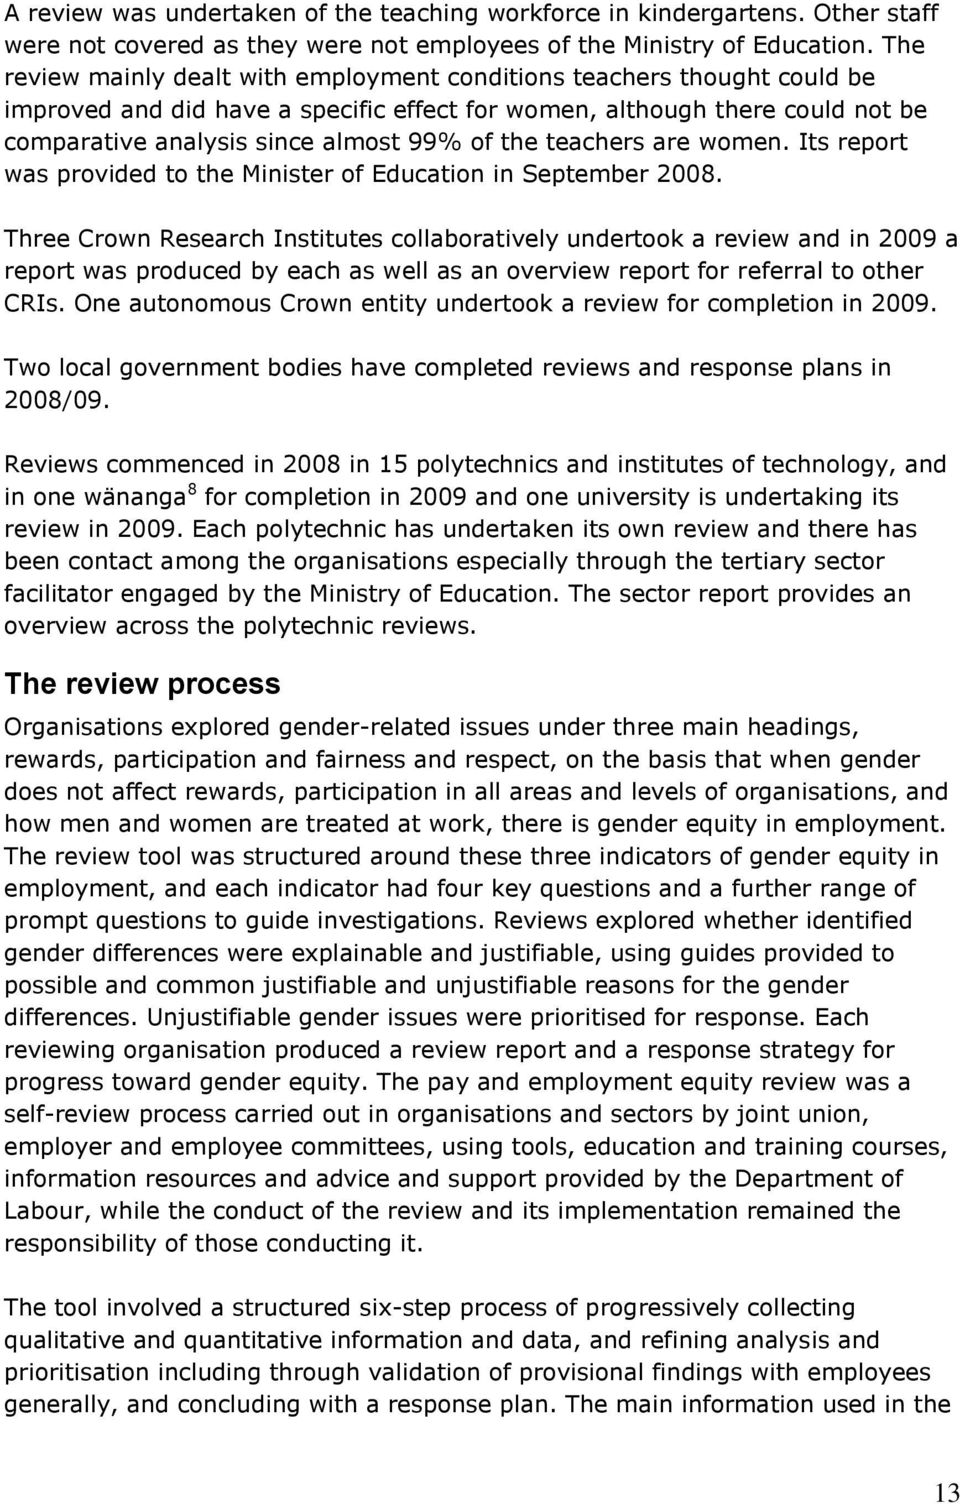 the teachers are women. Its report was provided to the Minister of Education in September 2008.